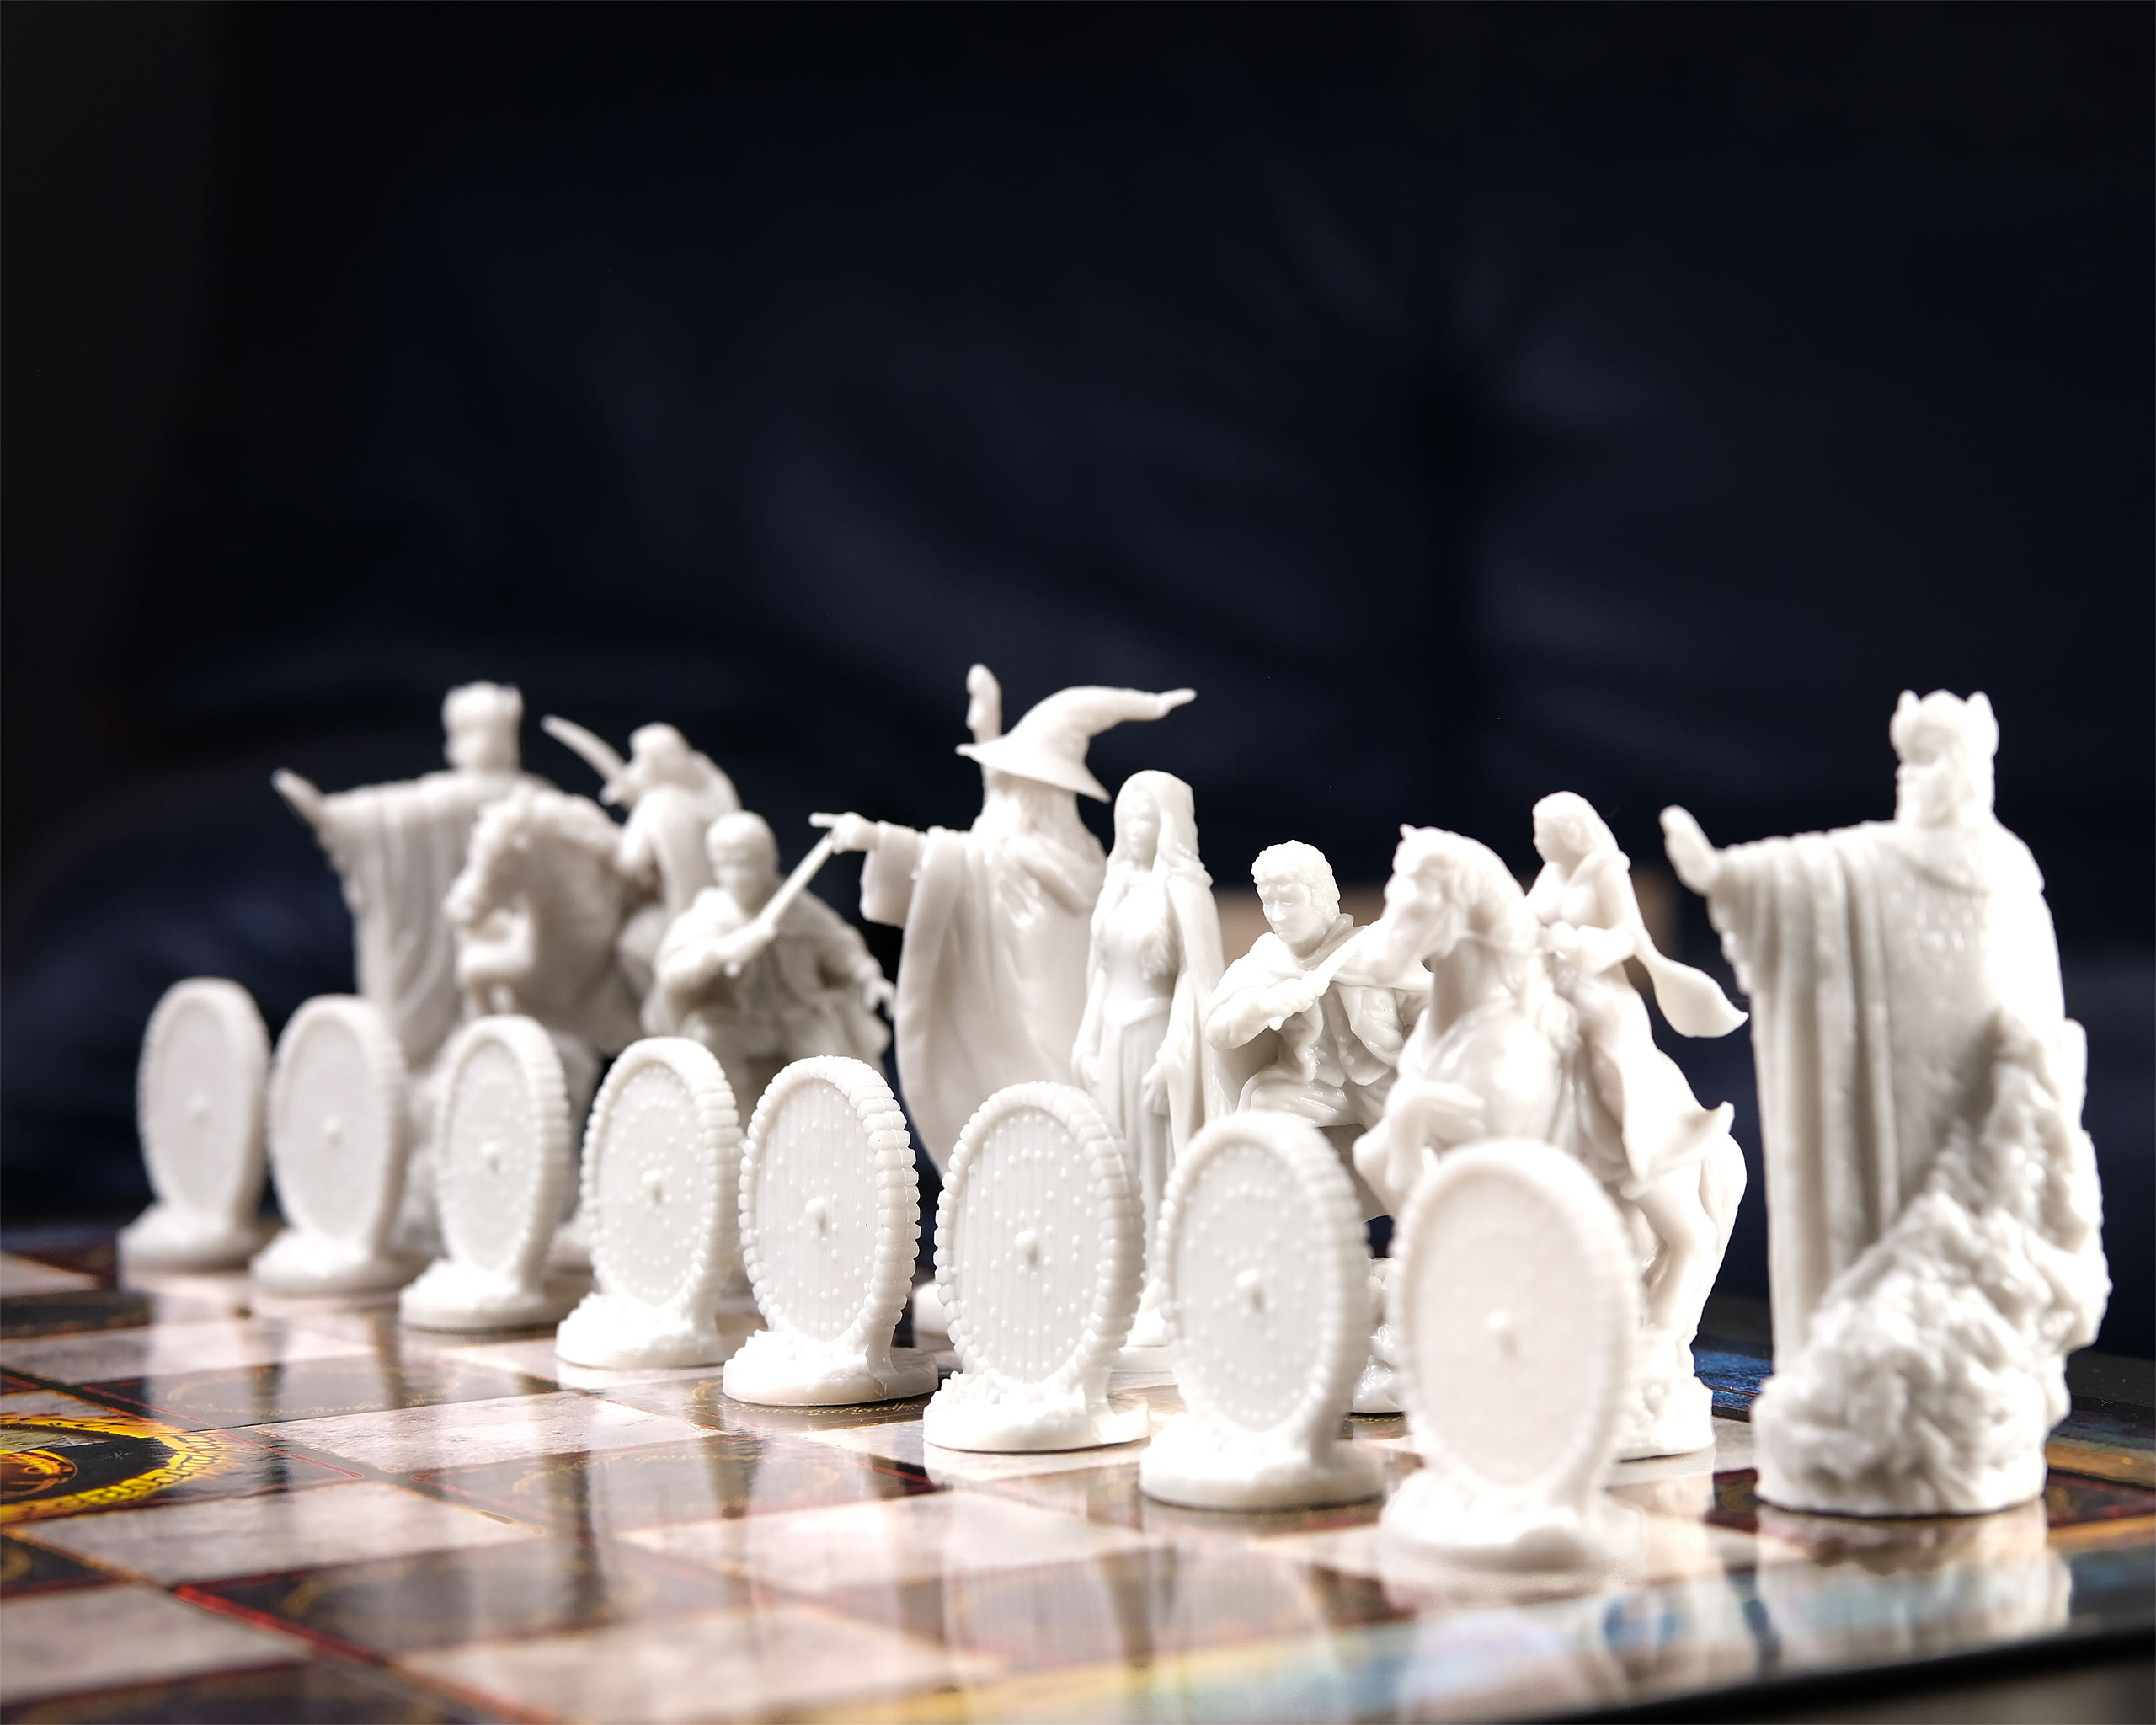 Lord of the Rings - Battle for Middle Earth Chess Set